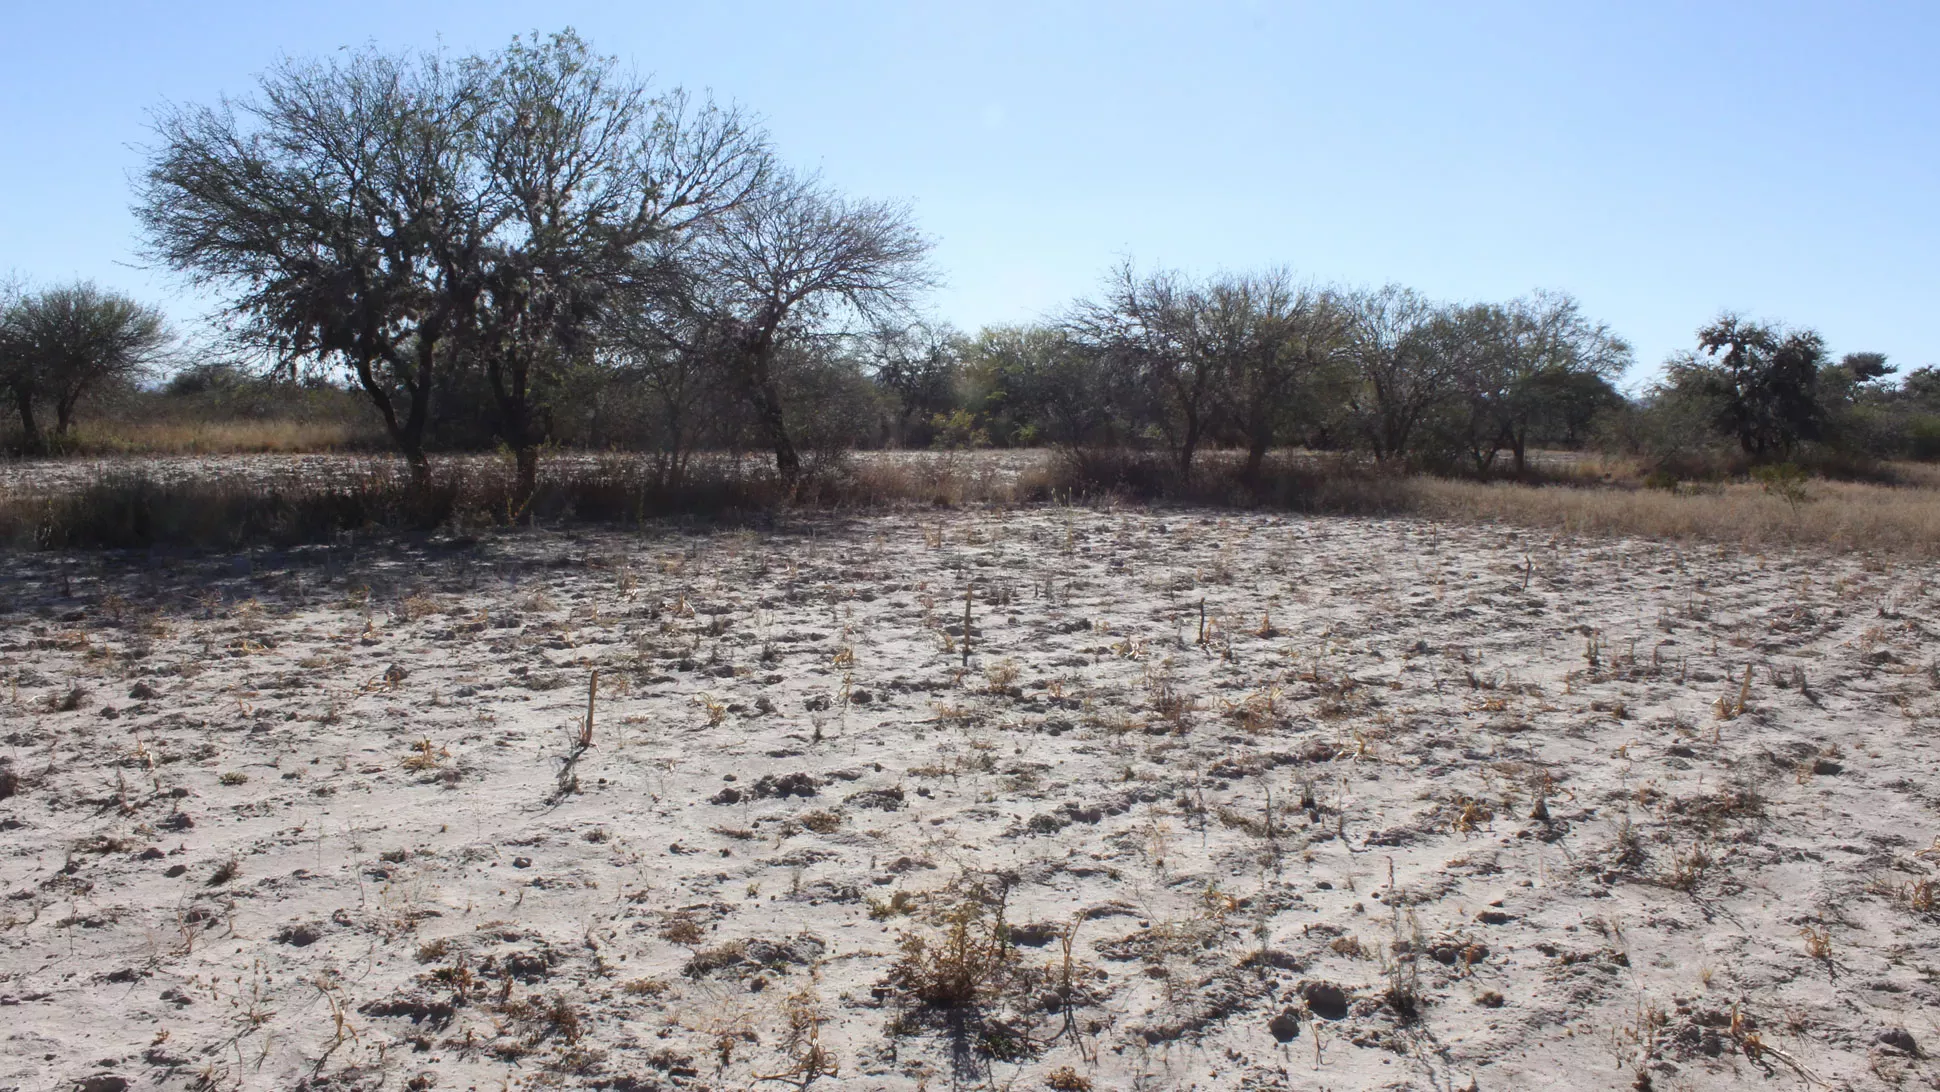 A dry and dusty landscape in Mexico. Barely any vegetation is visible apart from six very small dry trees. The sky above is bright blue.